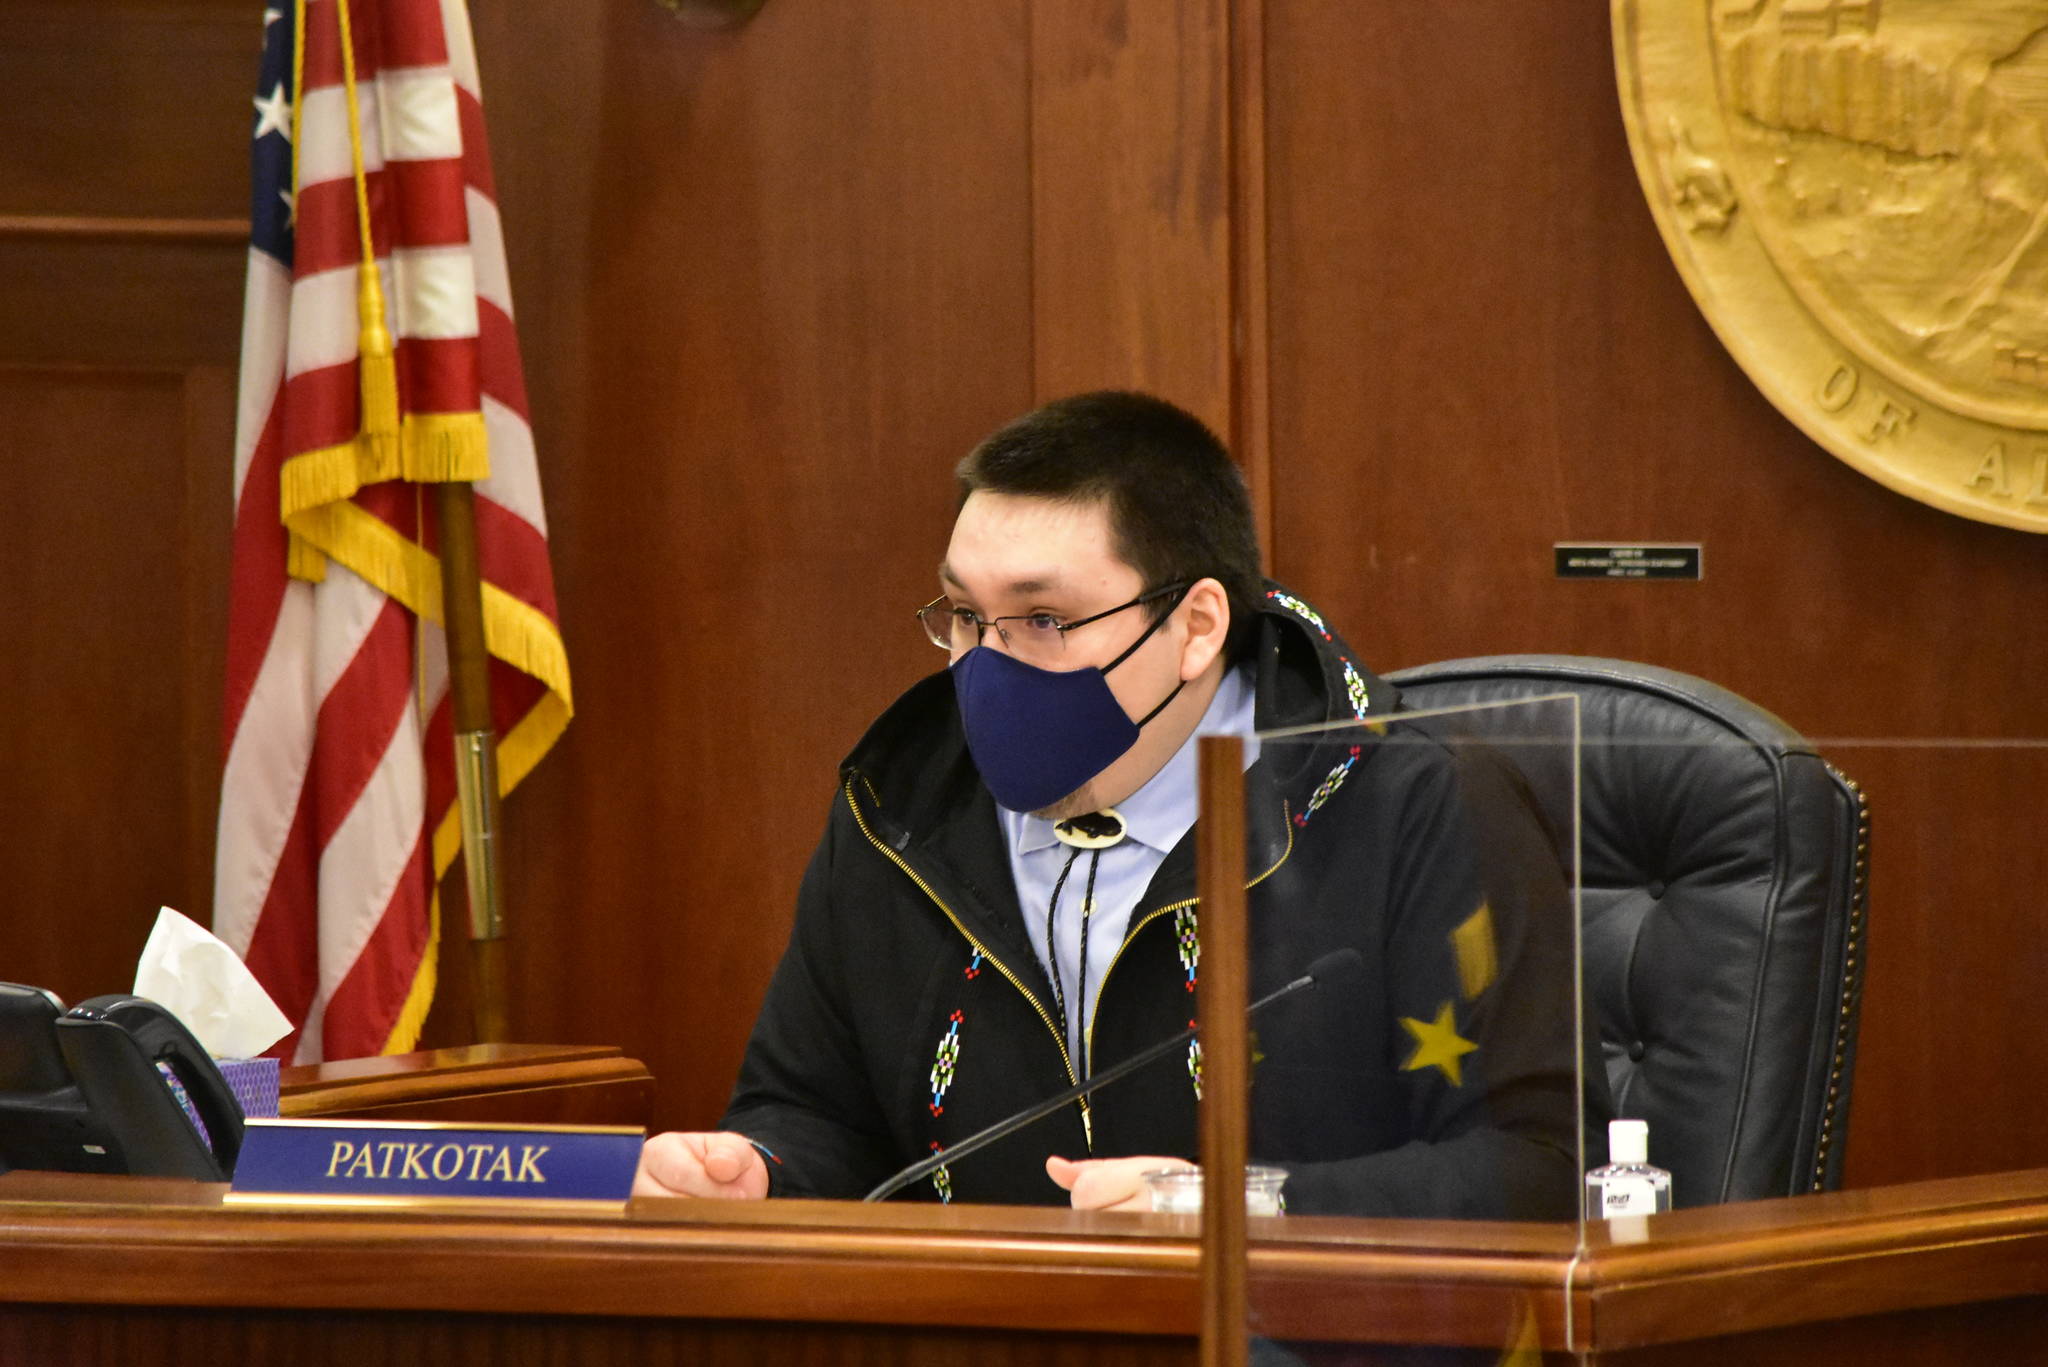 The election of  Rep. Josiah Patkotak, I-Utqiaġvik, seen here on Friday, Feb. 5, as Speaker Pro Tem is the only break so far in the deadlock in the House of Representatives. (Peter Segall / Juneau Empire)